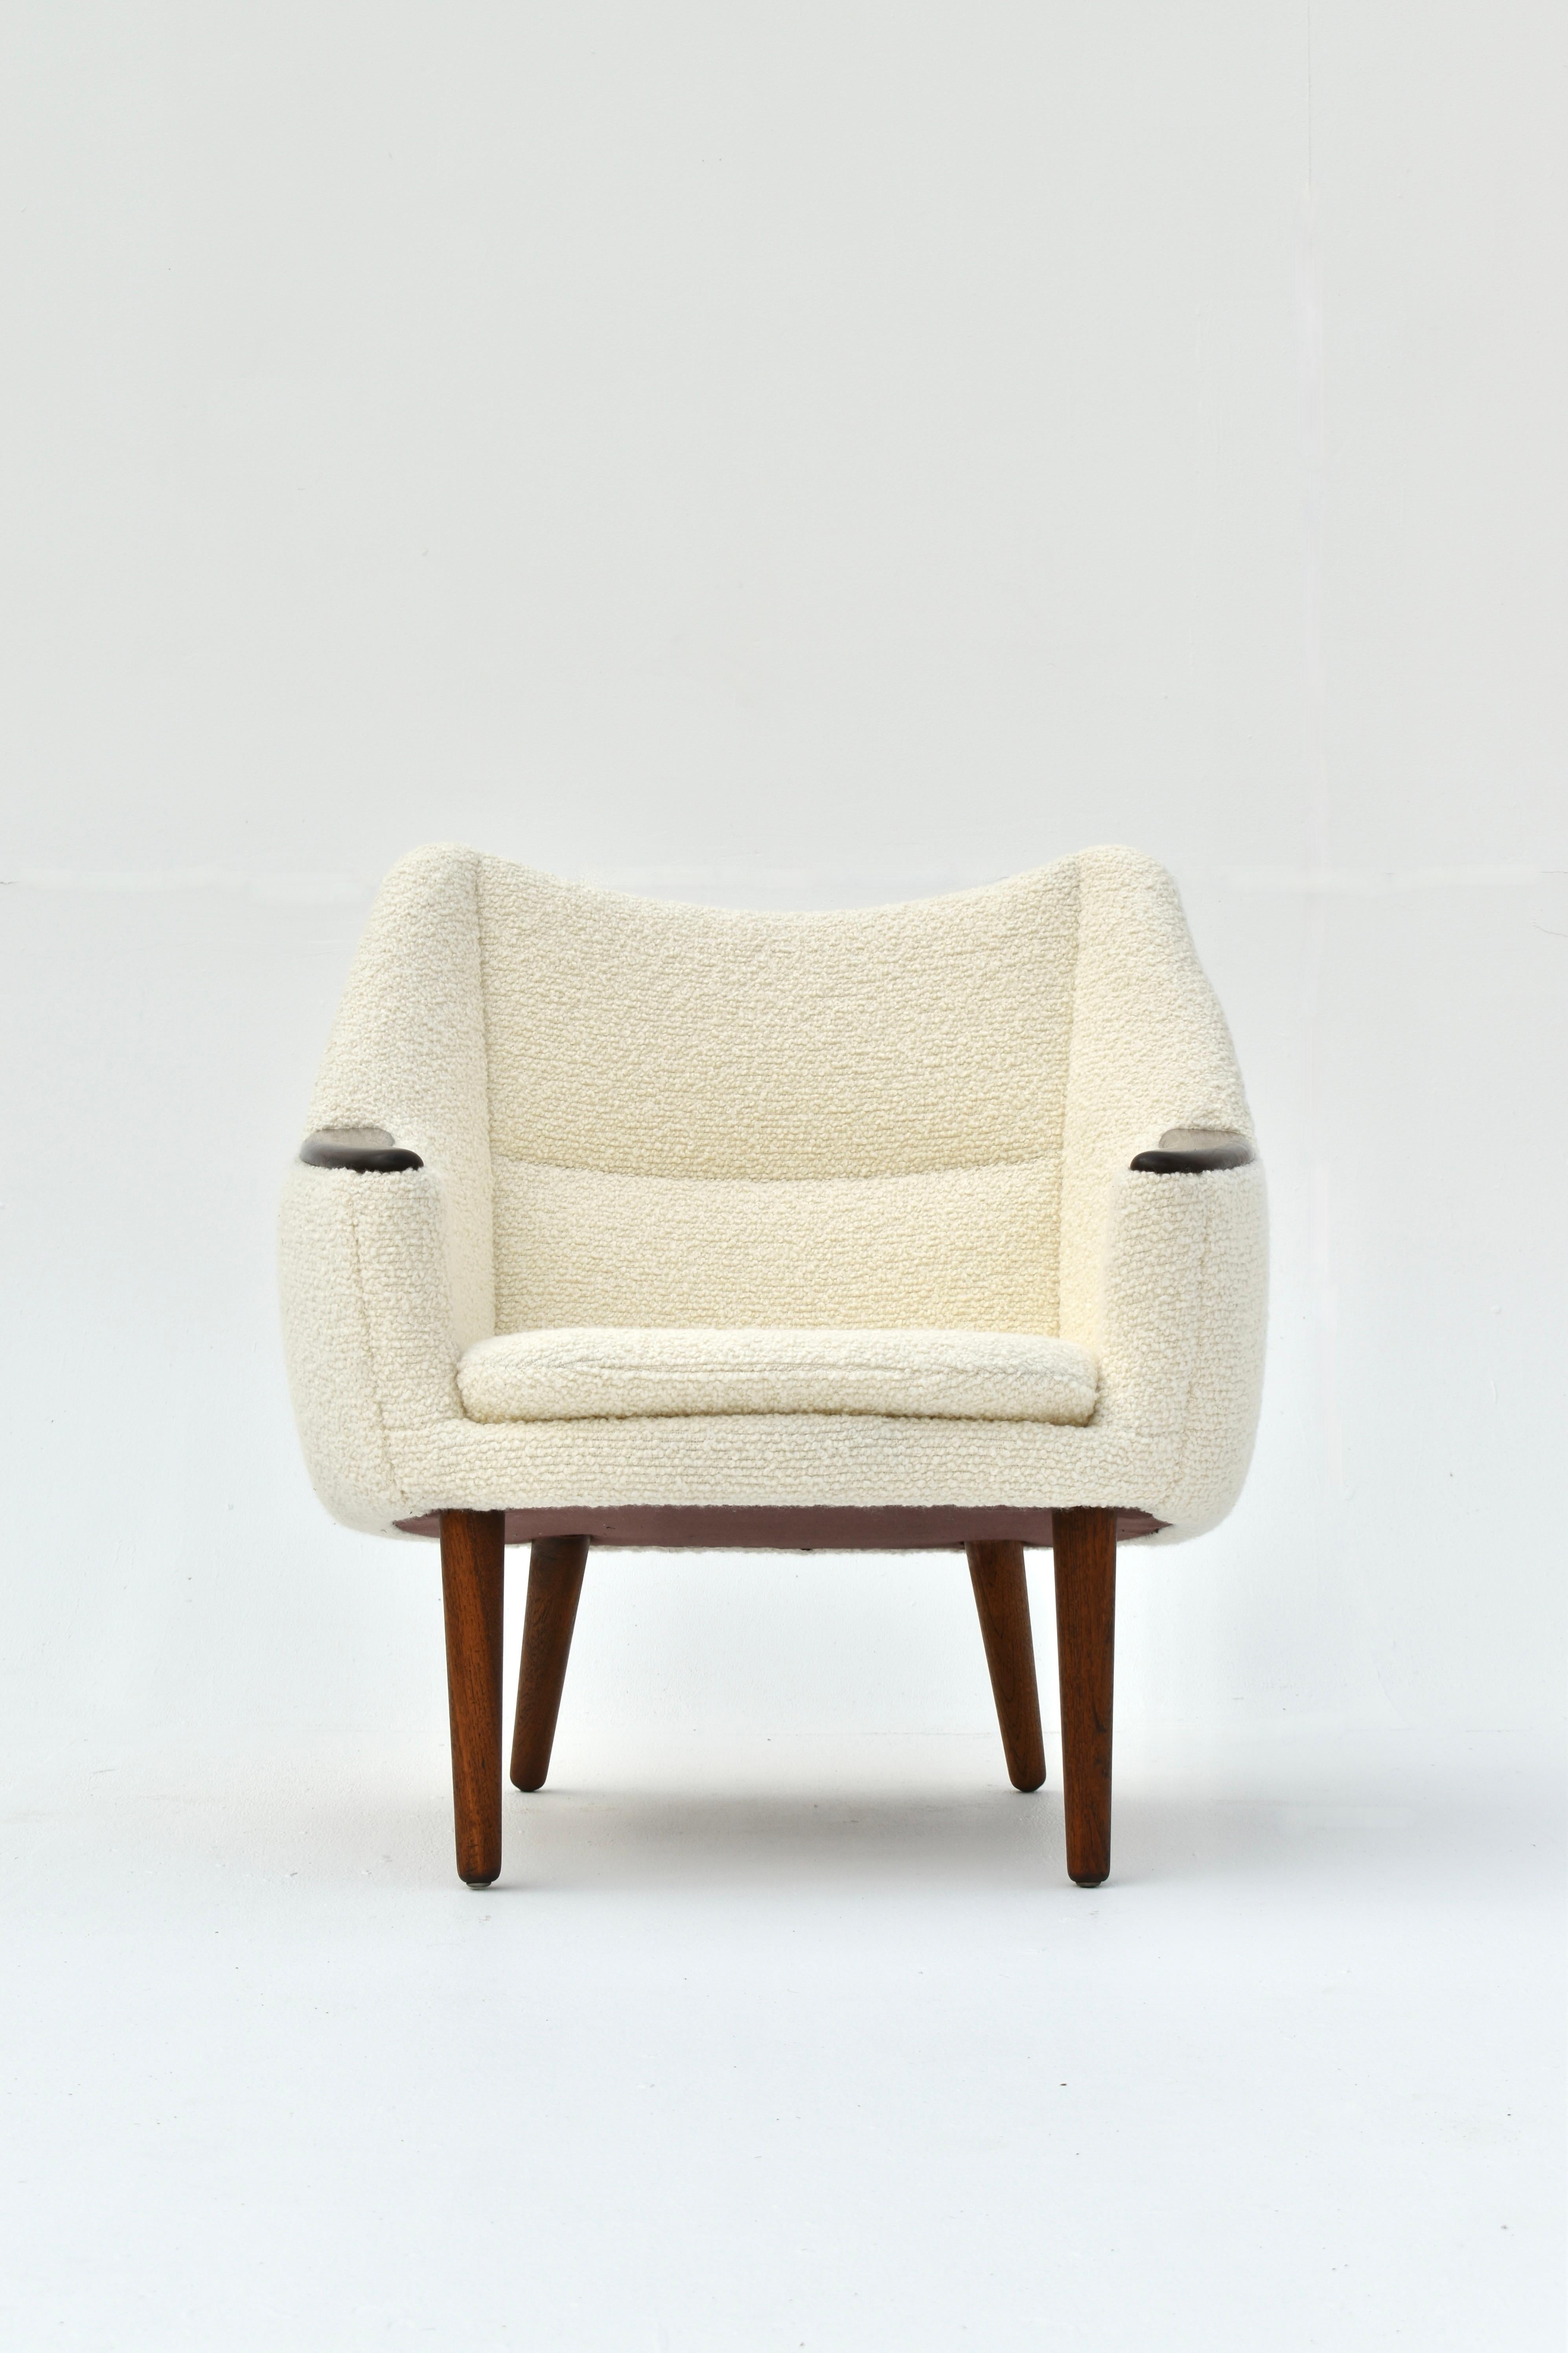 A very rarely seen Model 58 lounge chair designed by Kurt Østervig in 1958 for Henry Rolschau Mobler, Denmark.

A very inviting cocoon shape frame upholstered to the highest standard in Boucle wool from Bute Fabrics, Scotland. The tactile fabric